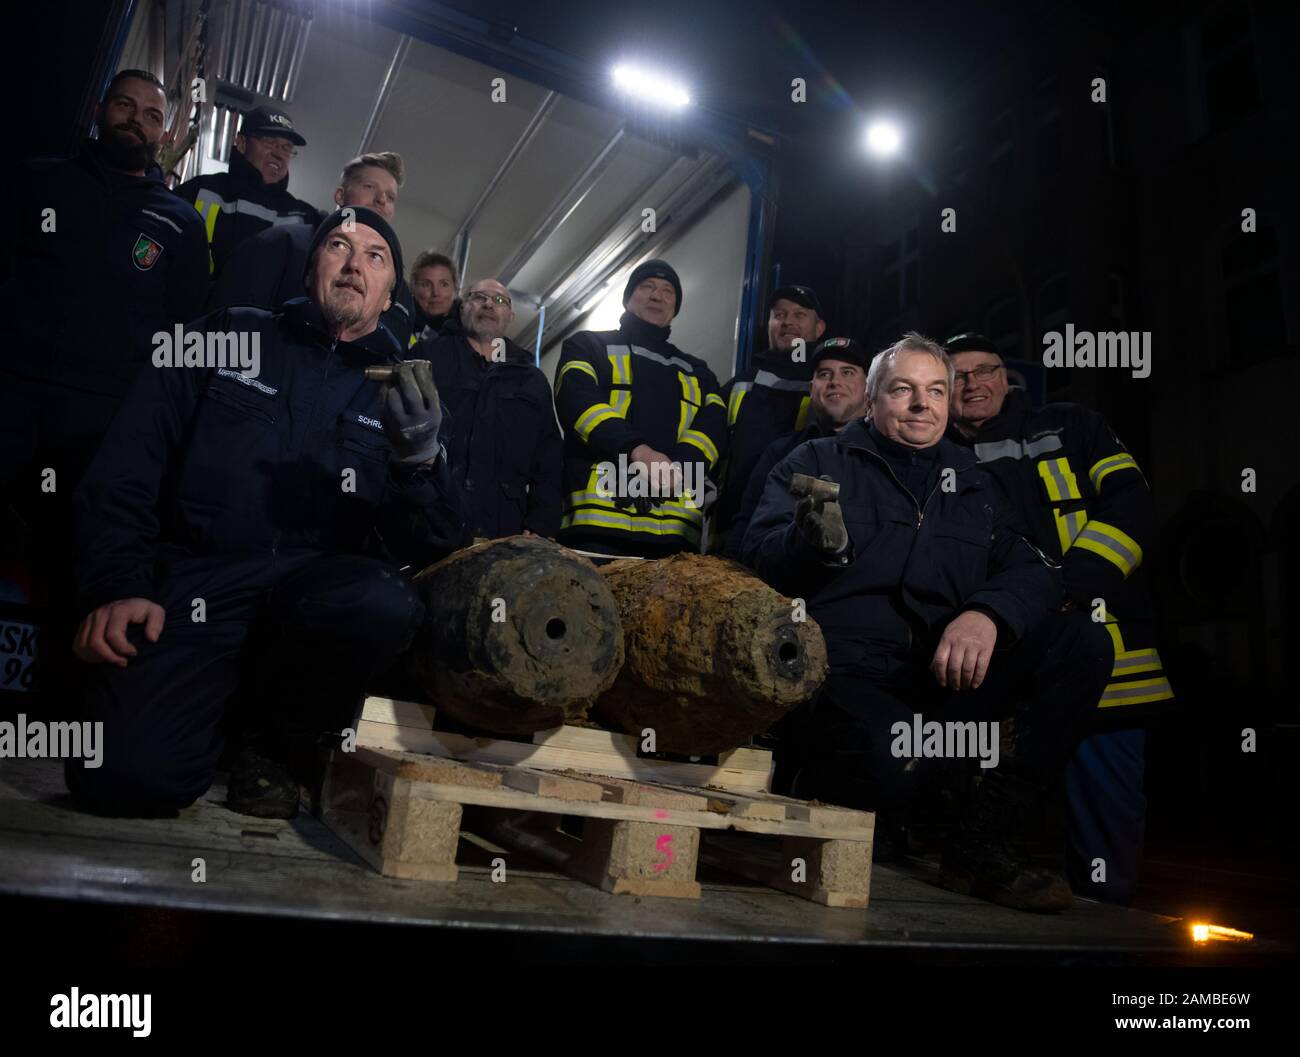 Dortmund, Germany. 12th Jan, 2020. Bomb disposal expert Karl-Friedrich Schröder (l) shows the detonator of one of two defused bombs from the Second World War on the loading area of a truck with his team. No unexploded ordnance had been detected at two other suspected sites. The aircraft bombs were located in a densely populated residential area. As a result, some 14 000 people had to leave their homes. Credit: Bernd Thissen/dpa/Alamy Live News Stock Photo